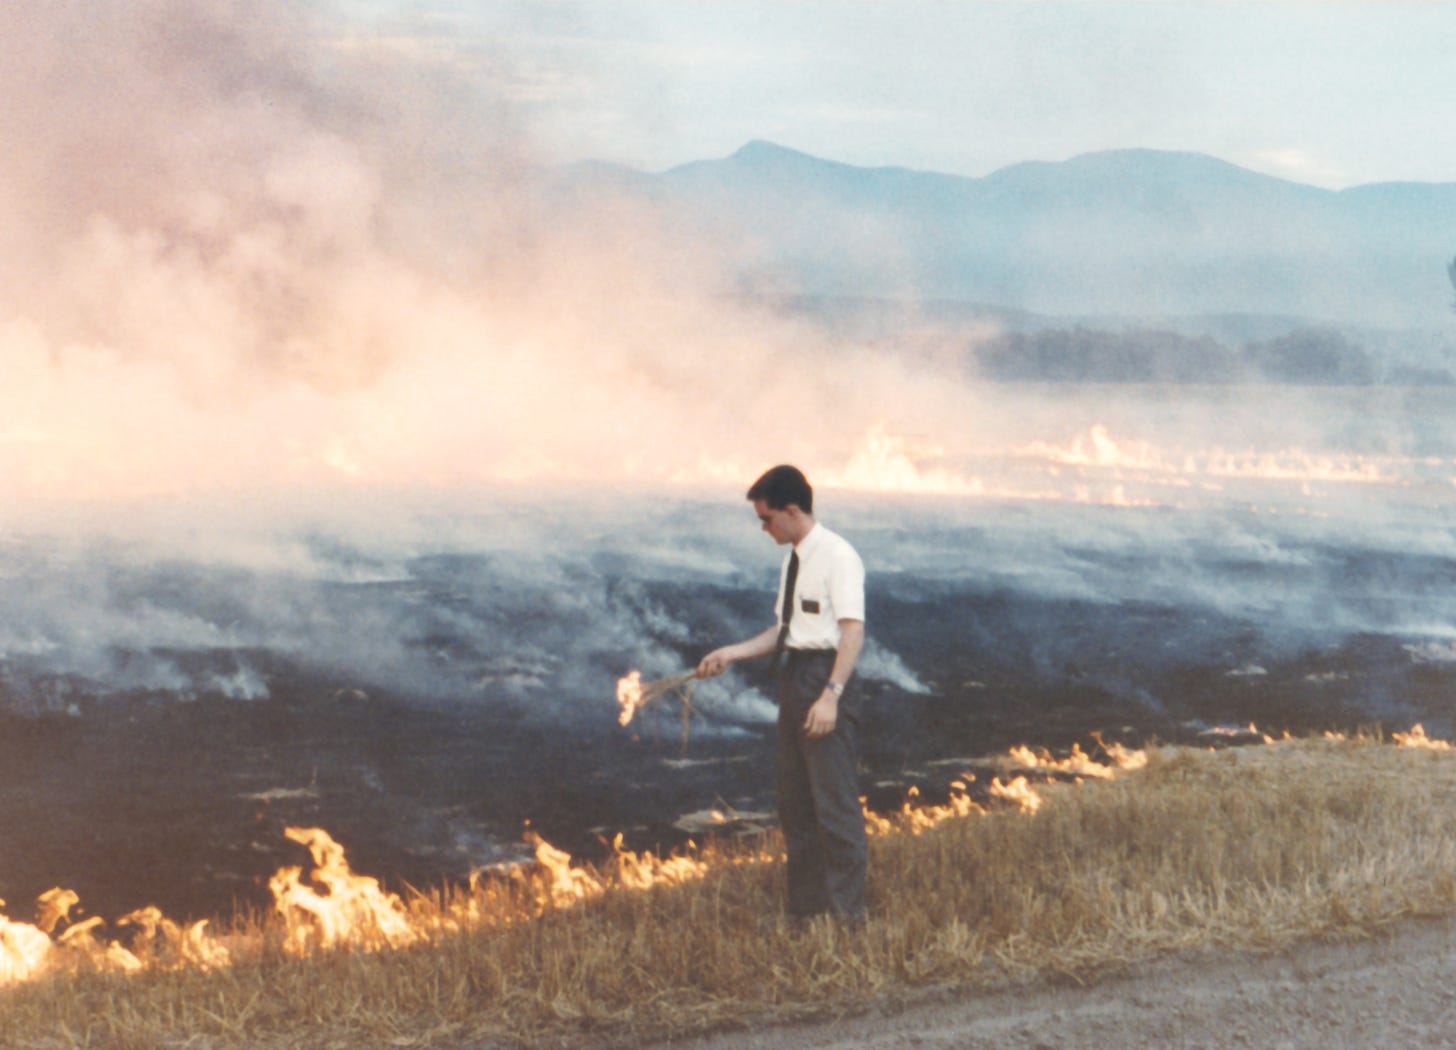 A Mormon missionary stands at the edge of a burning wheat field holding a sheaf of burning wheat stalks, as if he had lit the fire himself. Low blue mountains are visible in the distance, beyond the smoke.